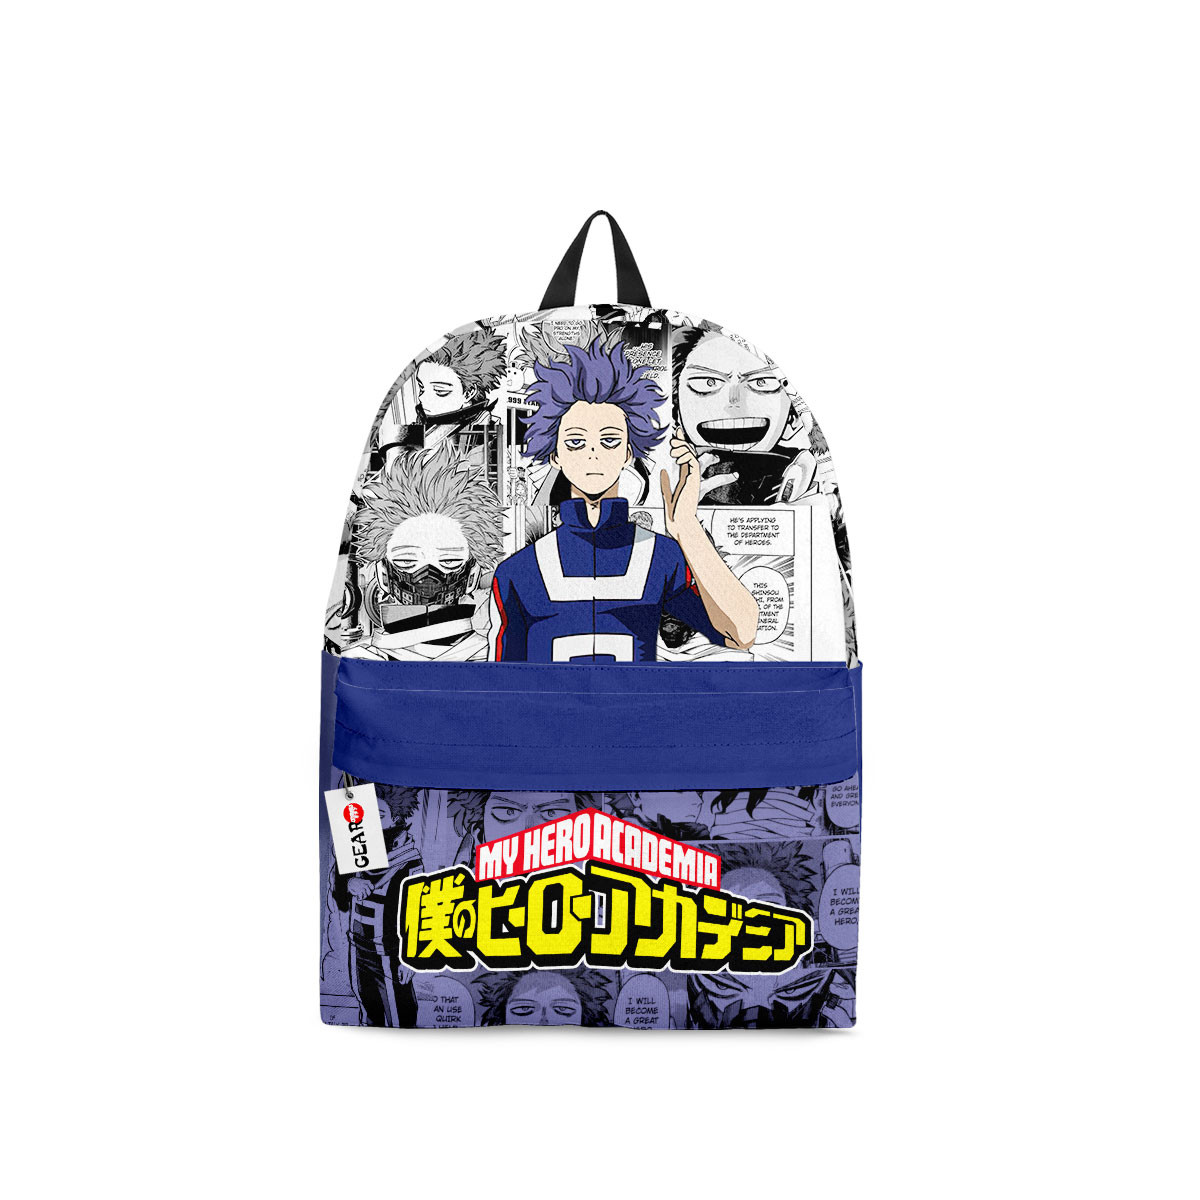 Latest Anime style products 257